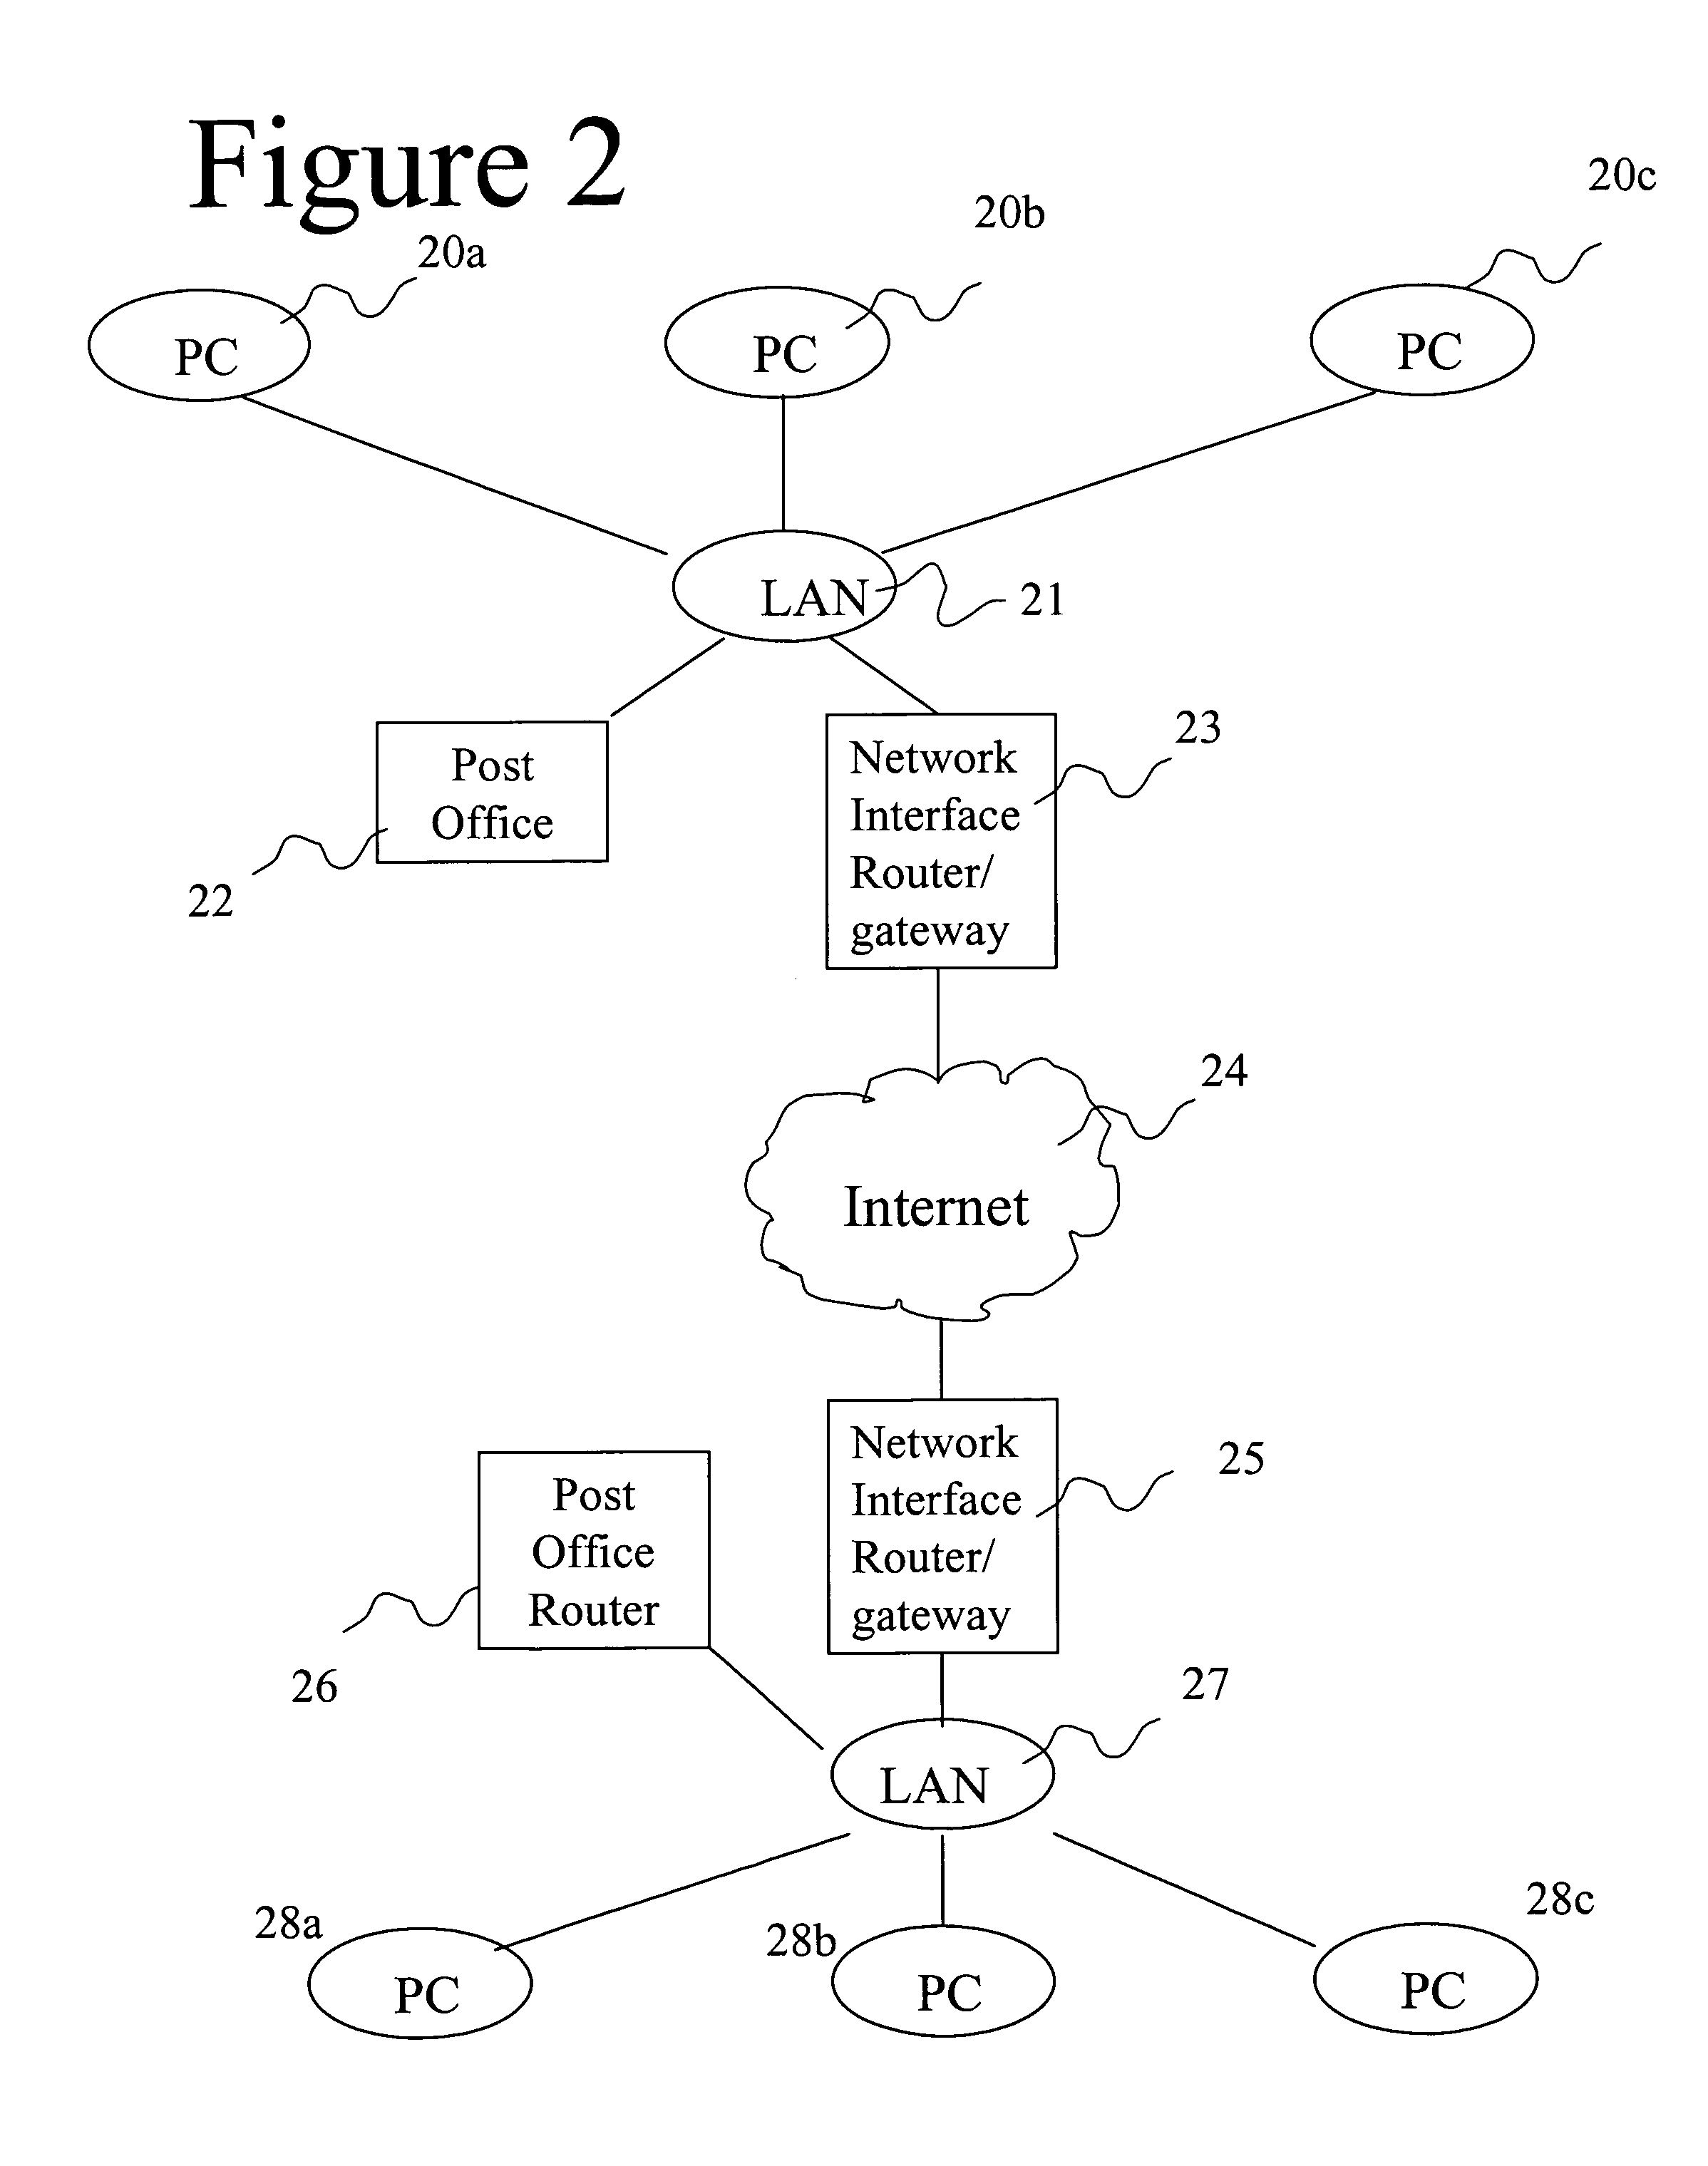 Method and apparatus for compressing attachments to electronic mail communications for transmission